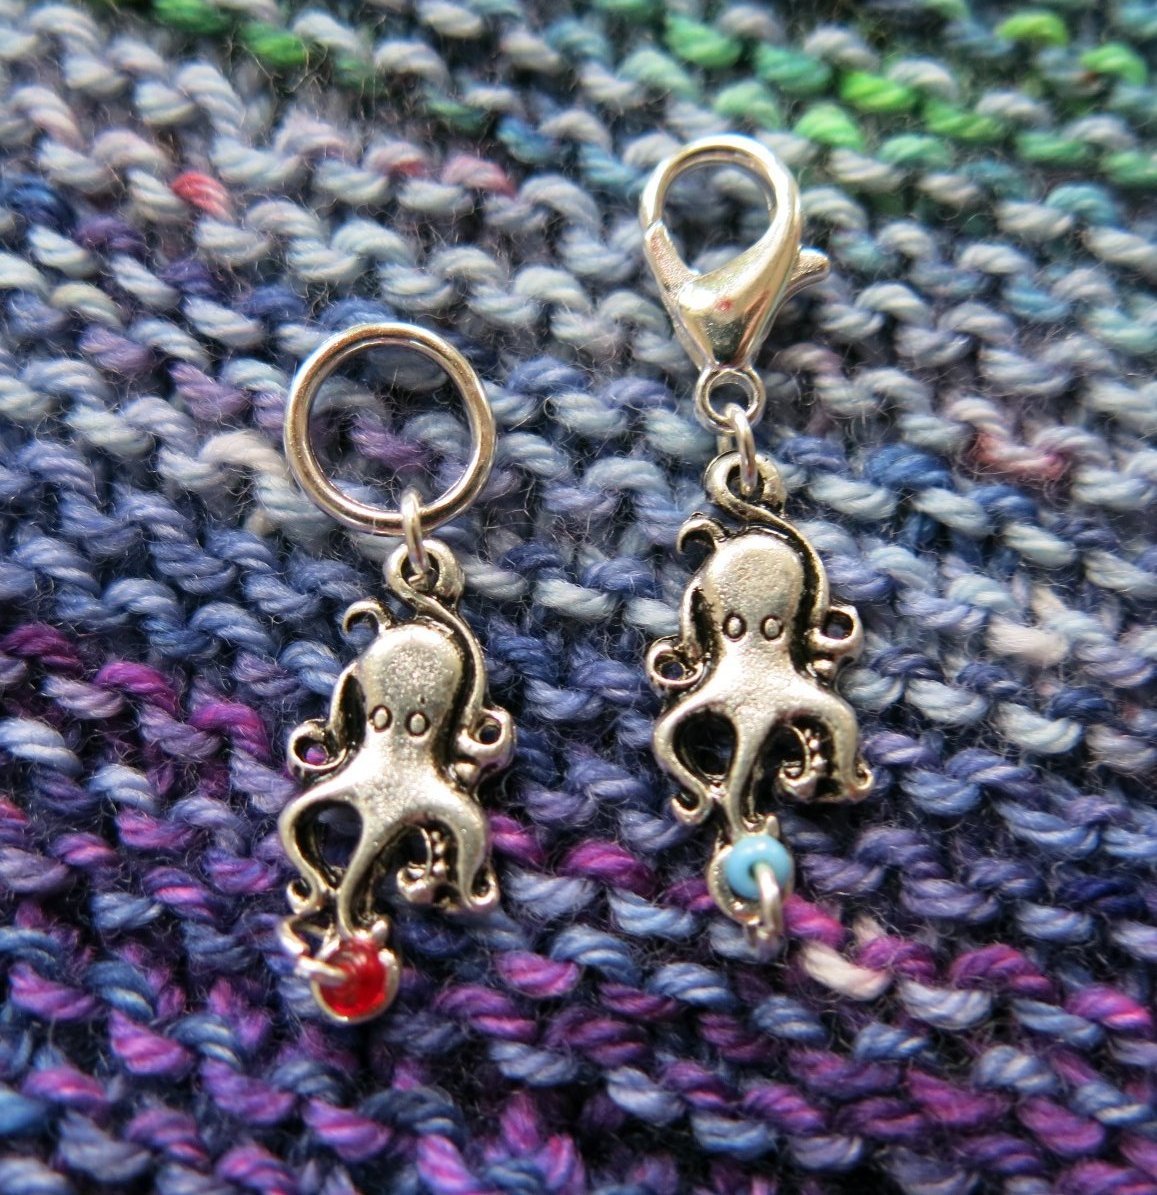 octopus progress keeper stitch markers for knitting and crochet